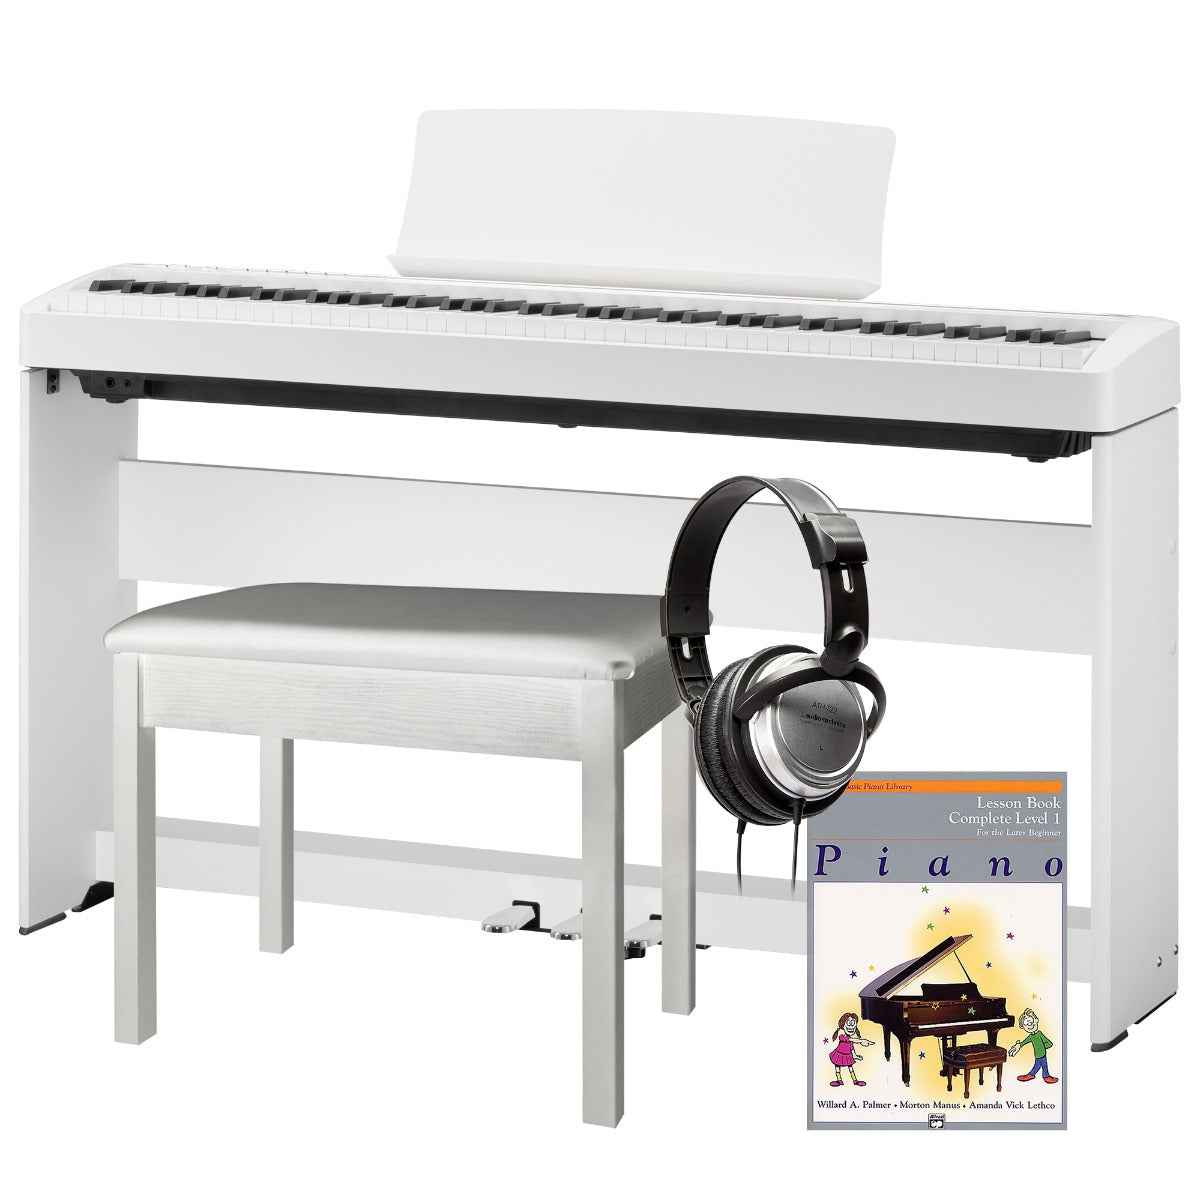 Kawai ES120 Portable Digital Piano - White, with included bundle accessories